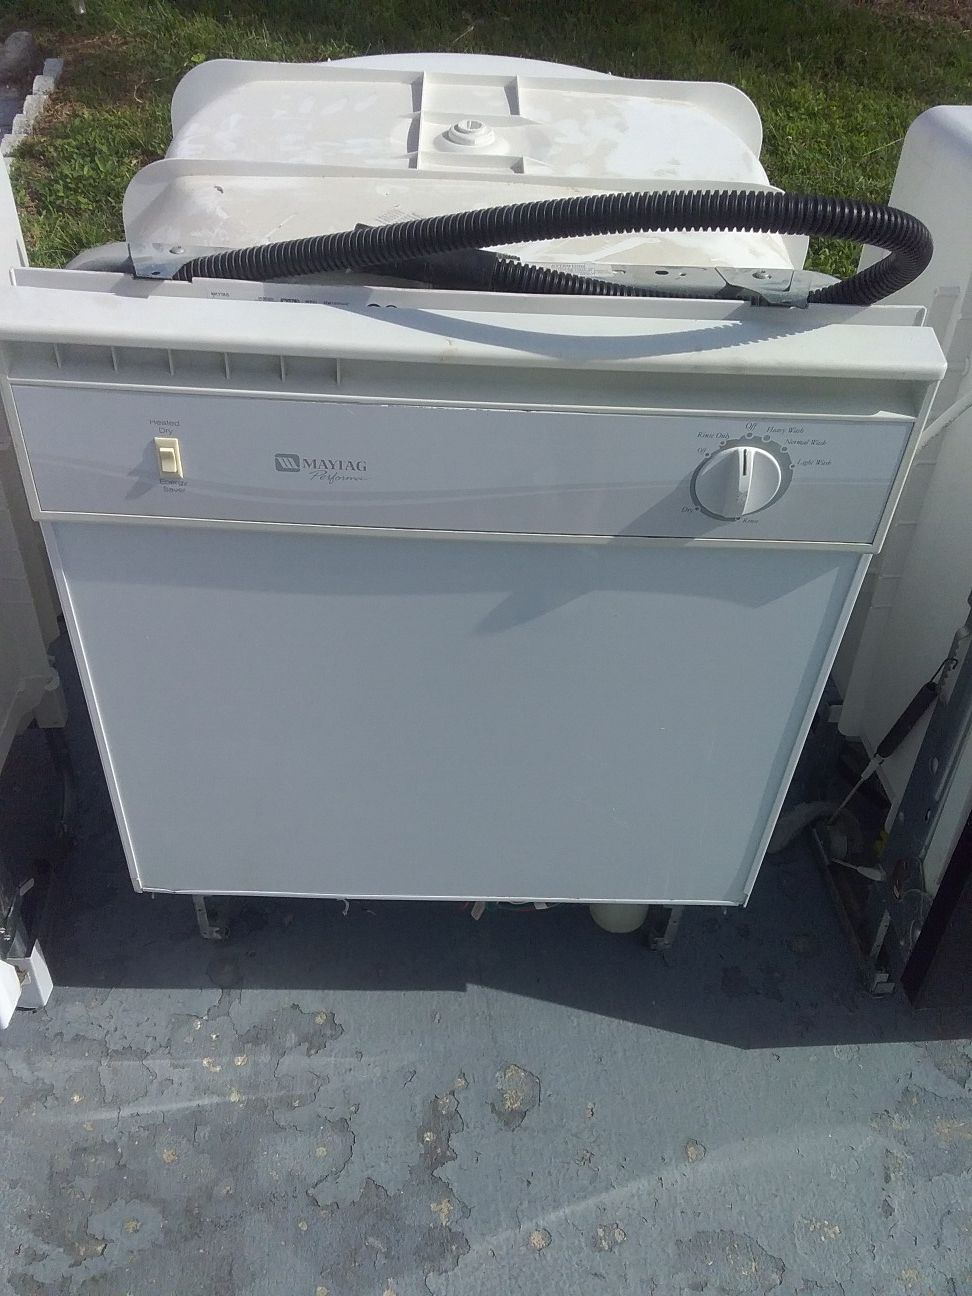 White maytag dishwasher with plastic tub in good working condition